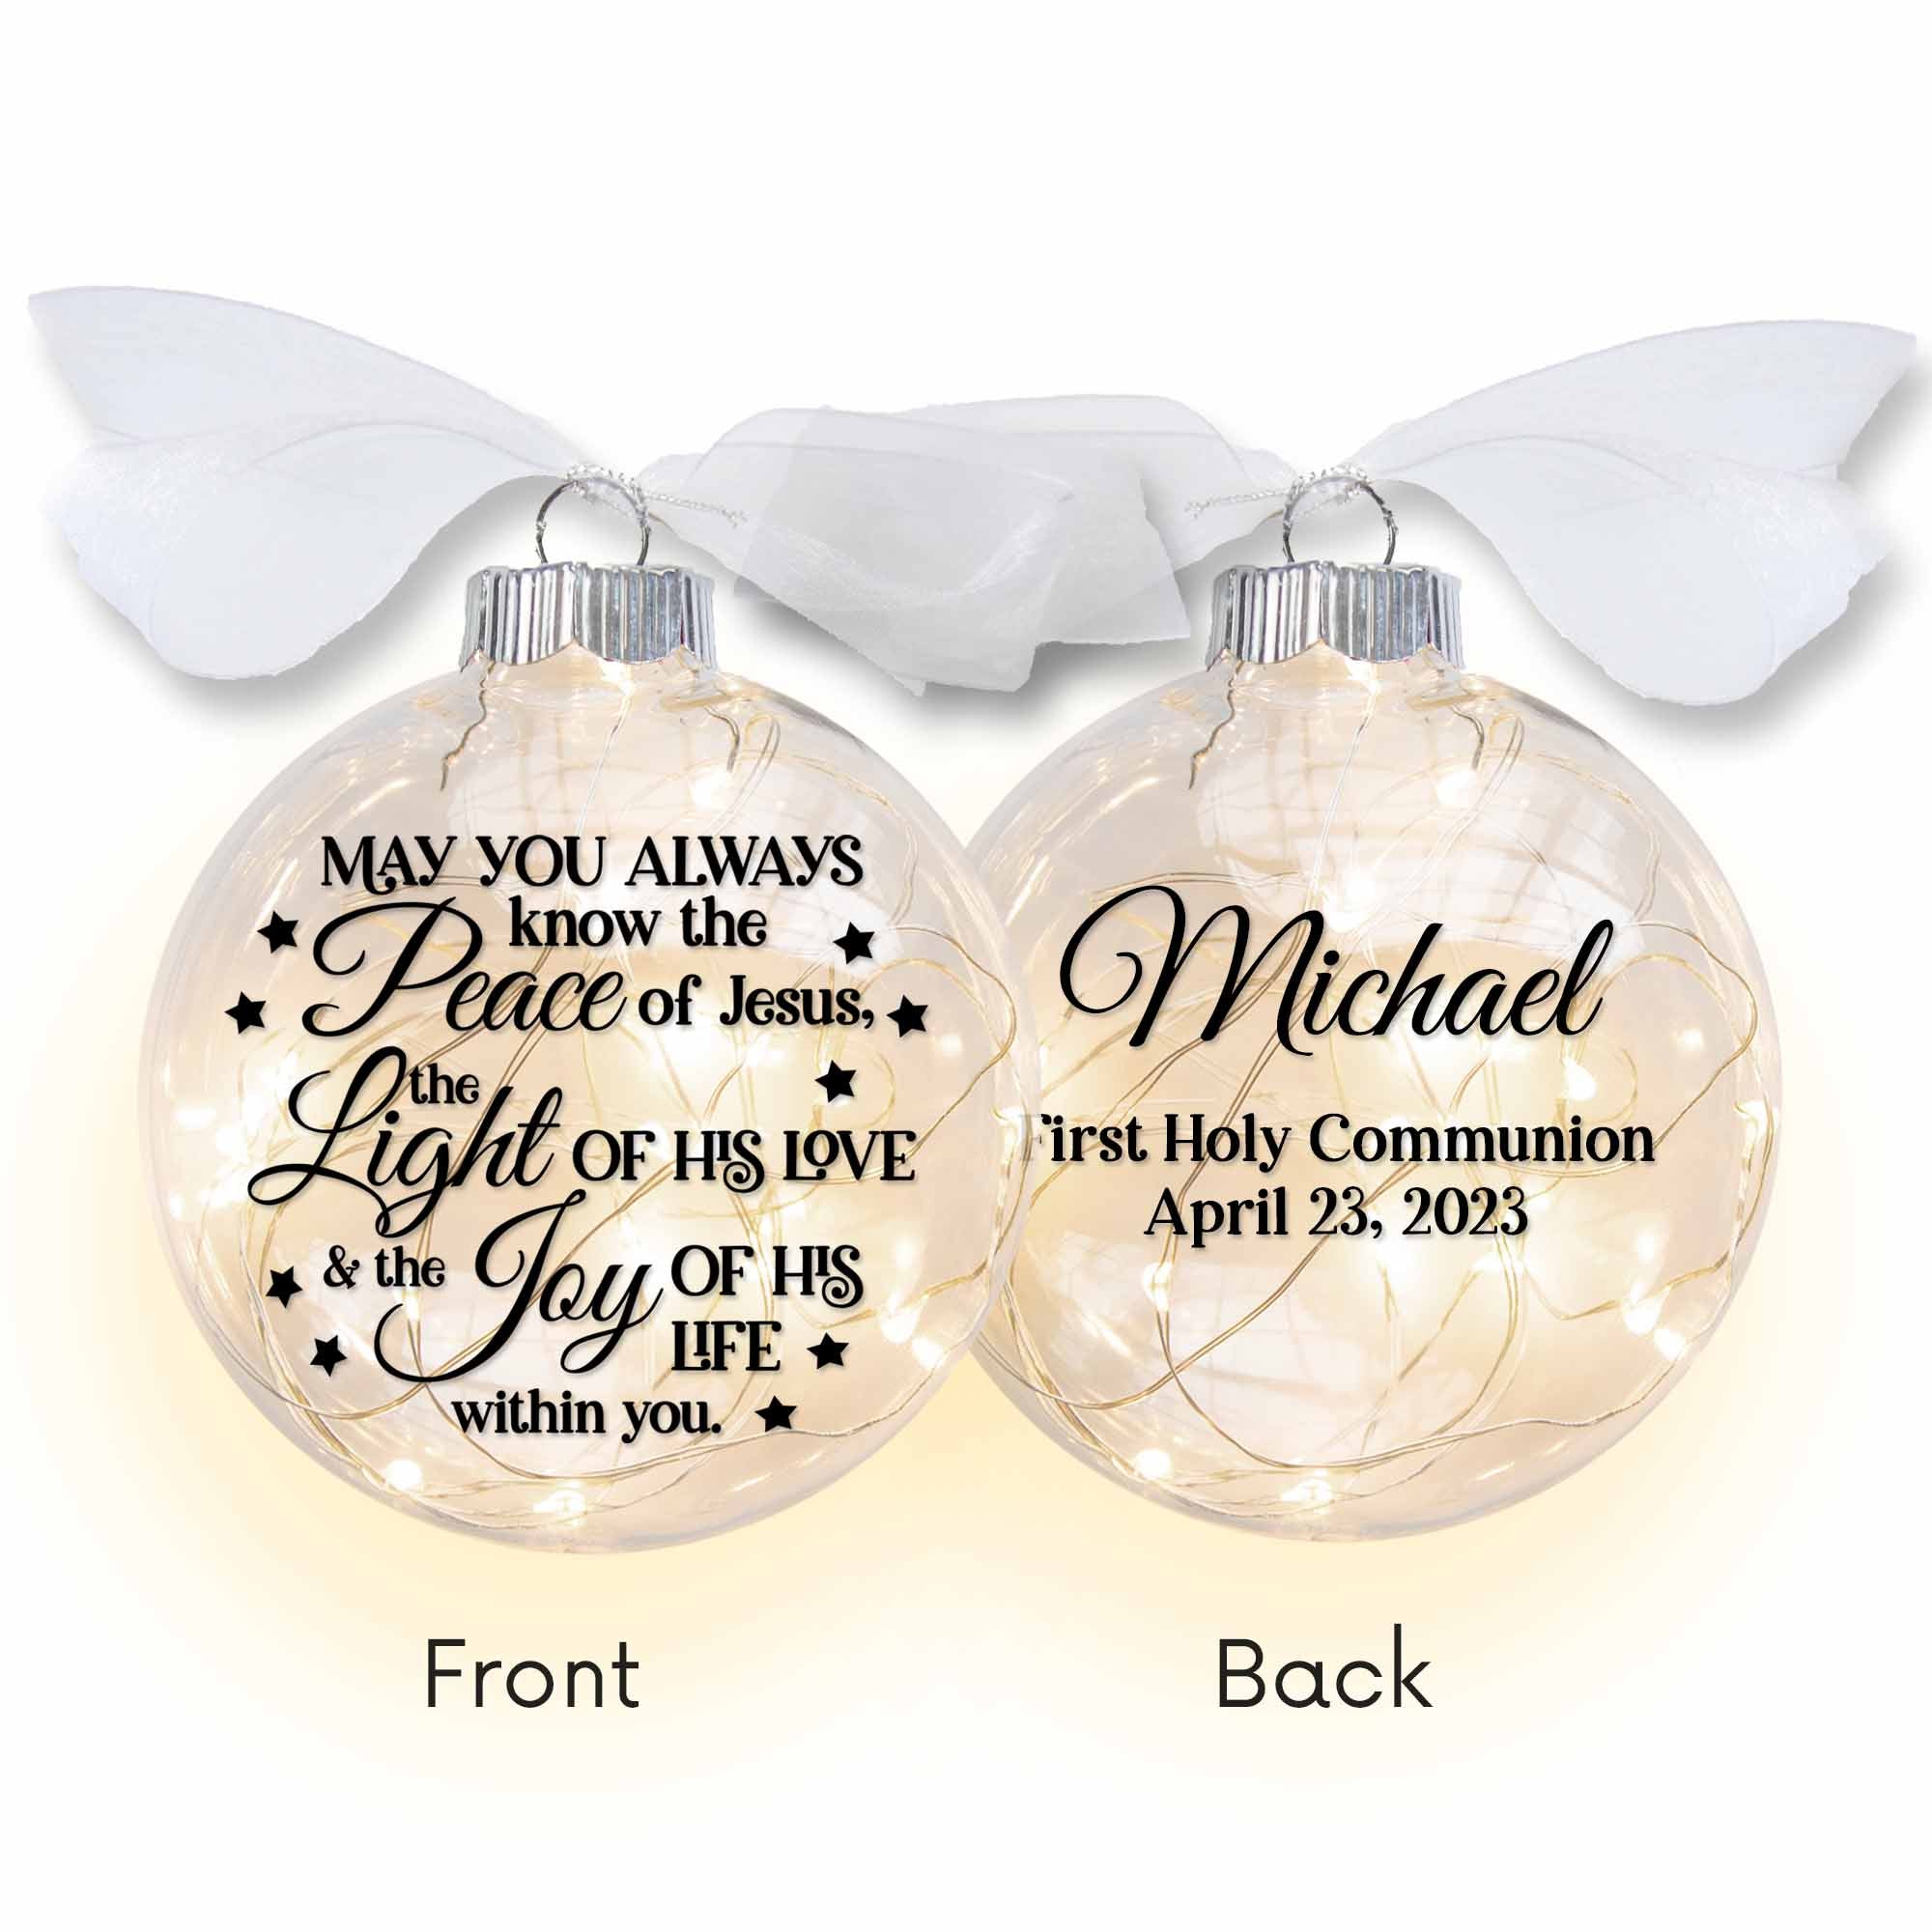 First Communion Lighted Christmas Ornament